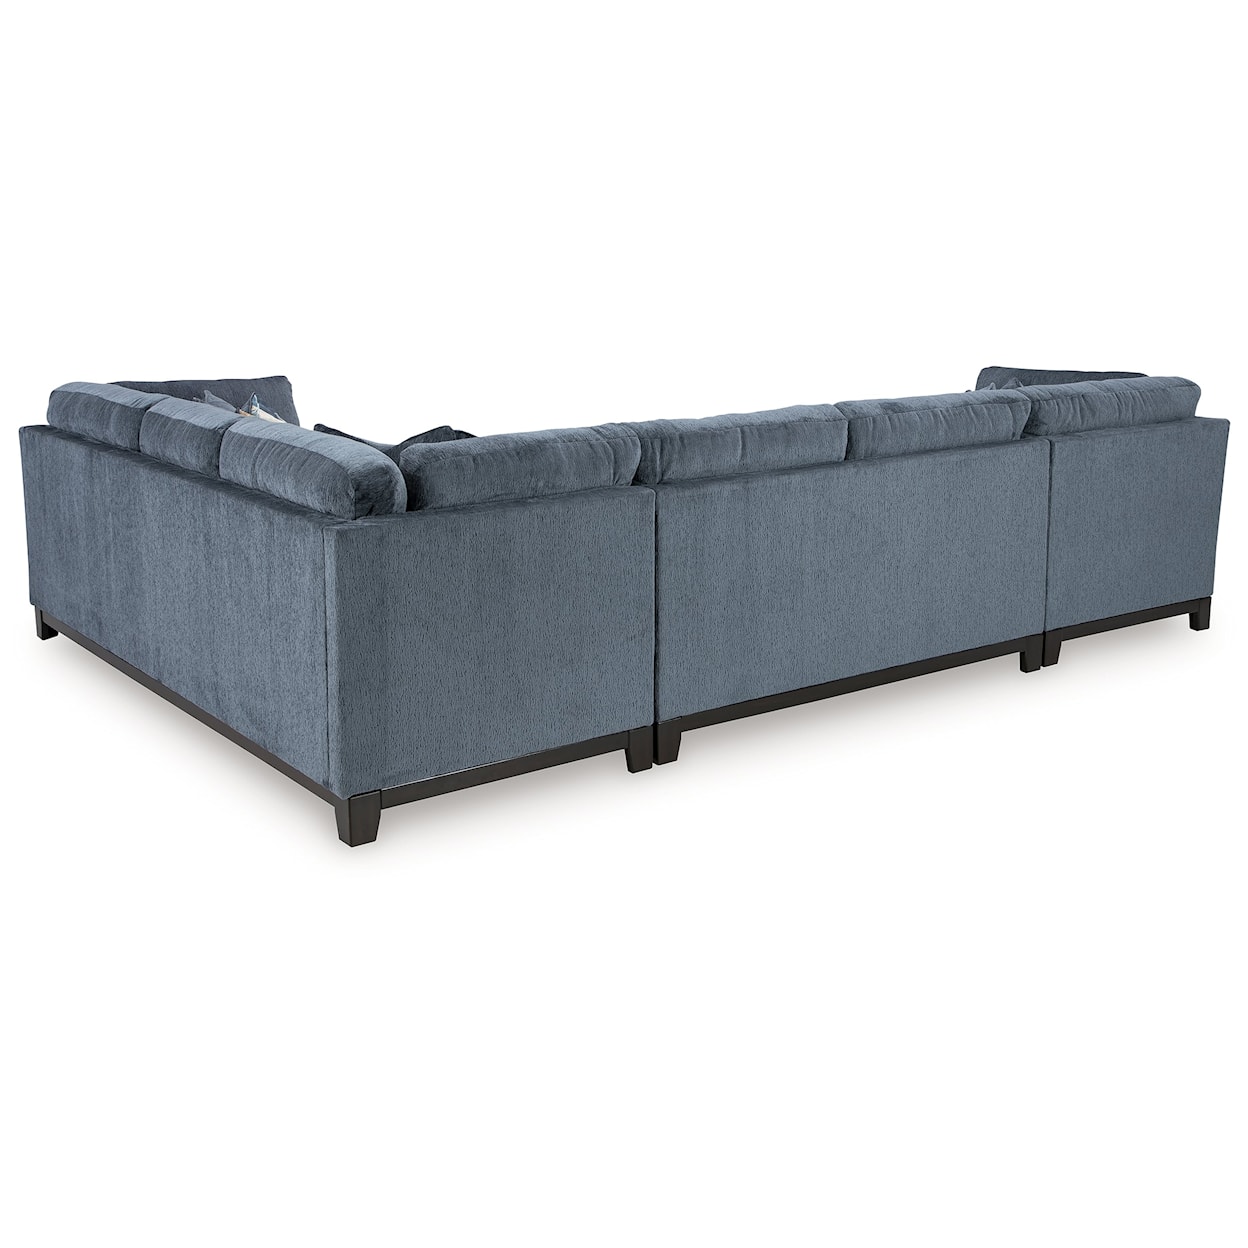 Benchcraft by Ashley Maxon Place 3-Piece Sectional With Chaise